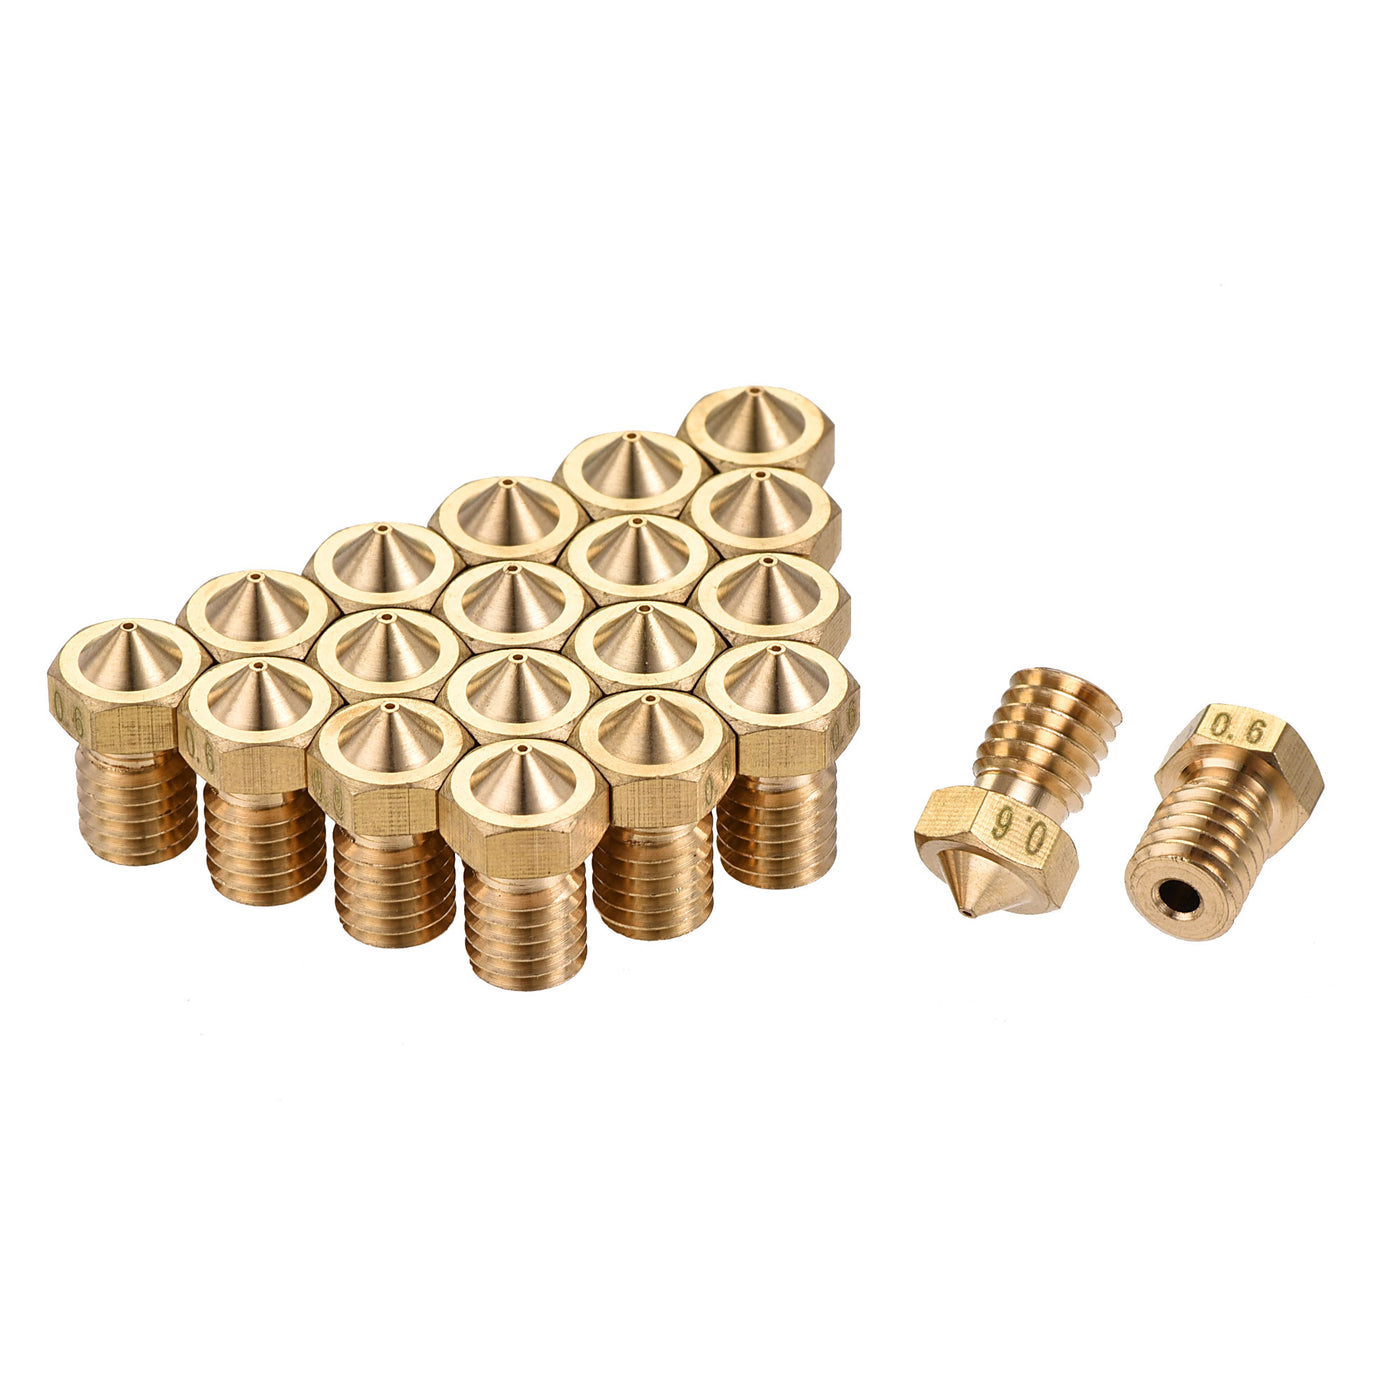 uxcell Uxcell 0.6mm 3D Printer Nozzle, 20pcs M6 Thread for V5 V6 1.75mm Extruder Print, Brass